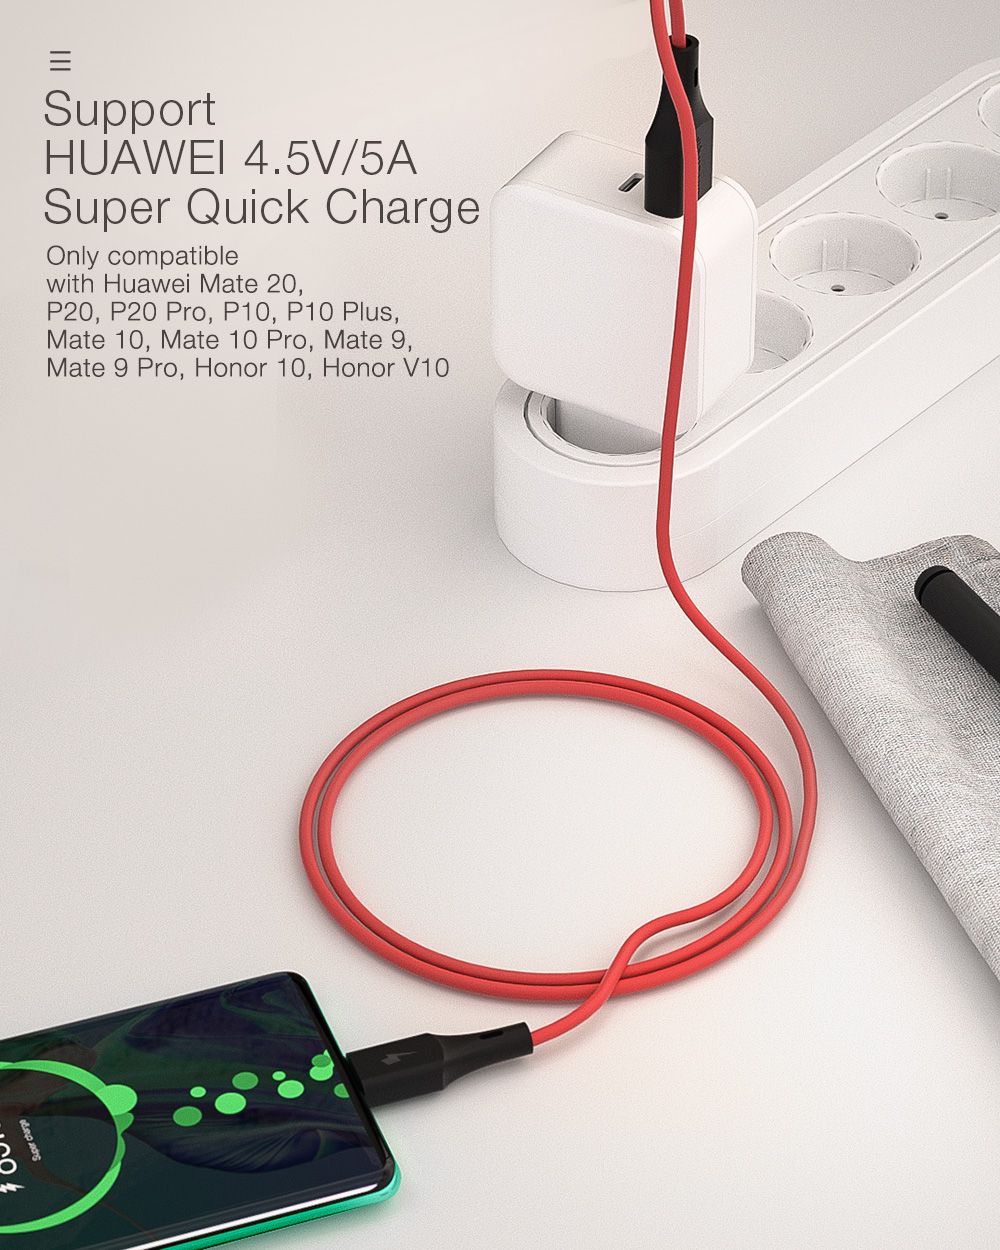 Blitzwolfreg-BW-TC19-5A-SuperCharge-QC30-USB-Type-C-Charging-Data-Cable-09m18m-for-HUAWEI-P30-Pro-Ma-1532790